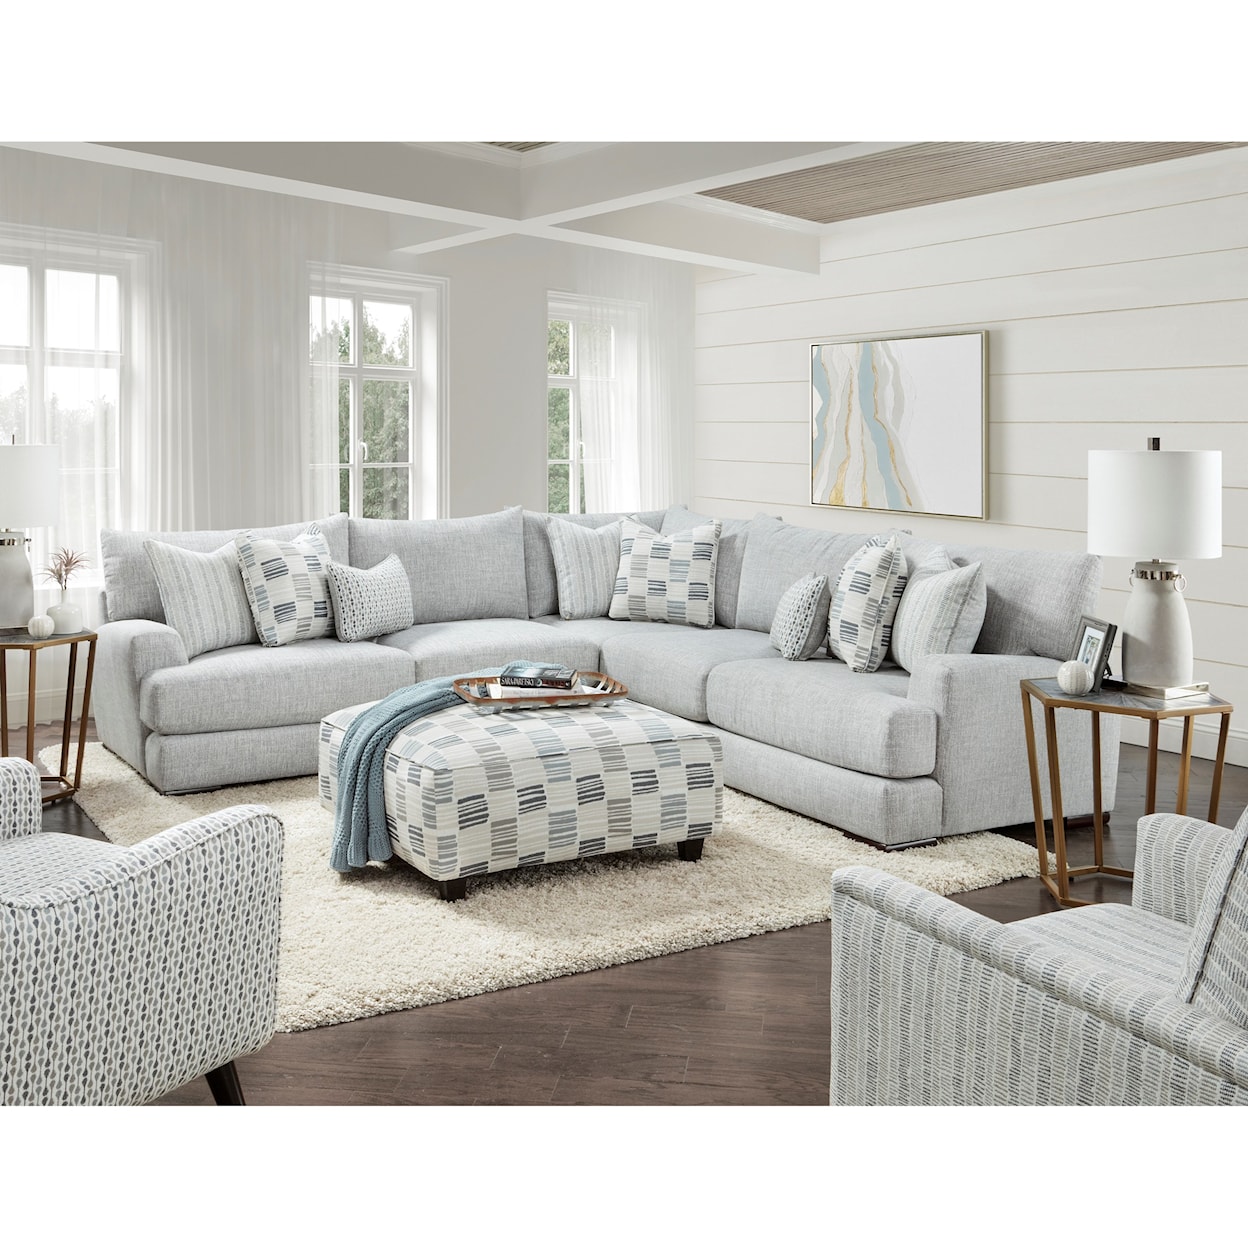 Fusion Furniture 51 ENTICE PAVER Living Room Group